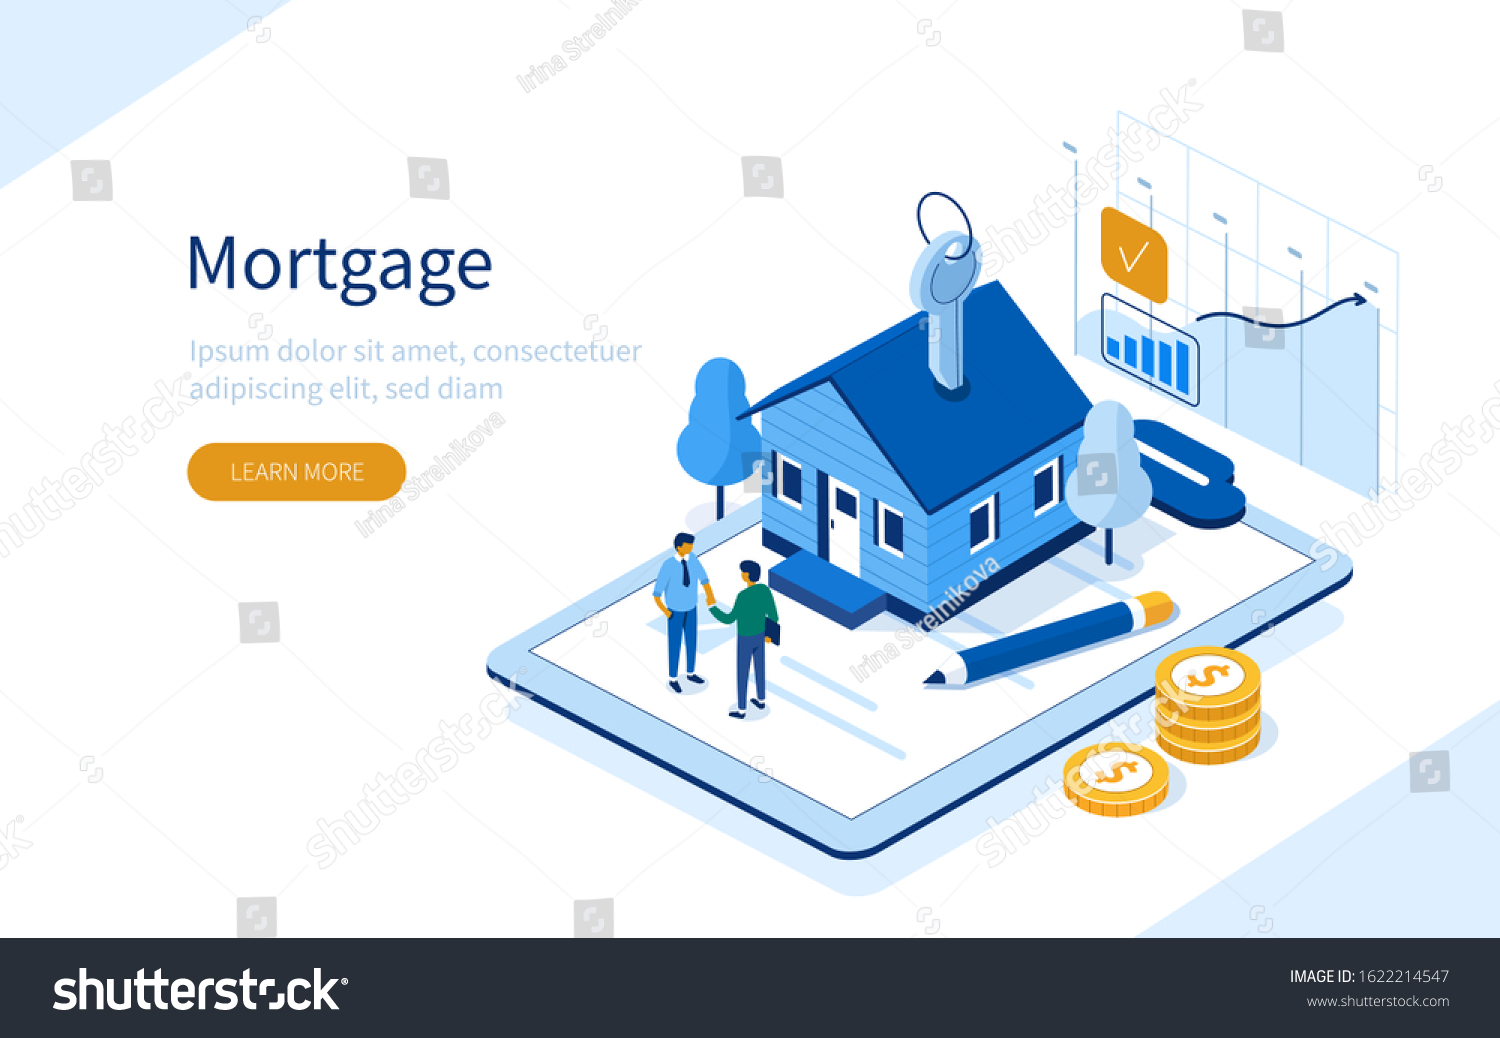 SVG of Character Buying Mortgage House and Shaking Hands with Real Estate Agent. People Invest Money in Real Estate Property. House Loan, Rent and Mortgage Concept. Flat Isometric Vector Illustration. svg